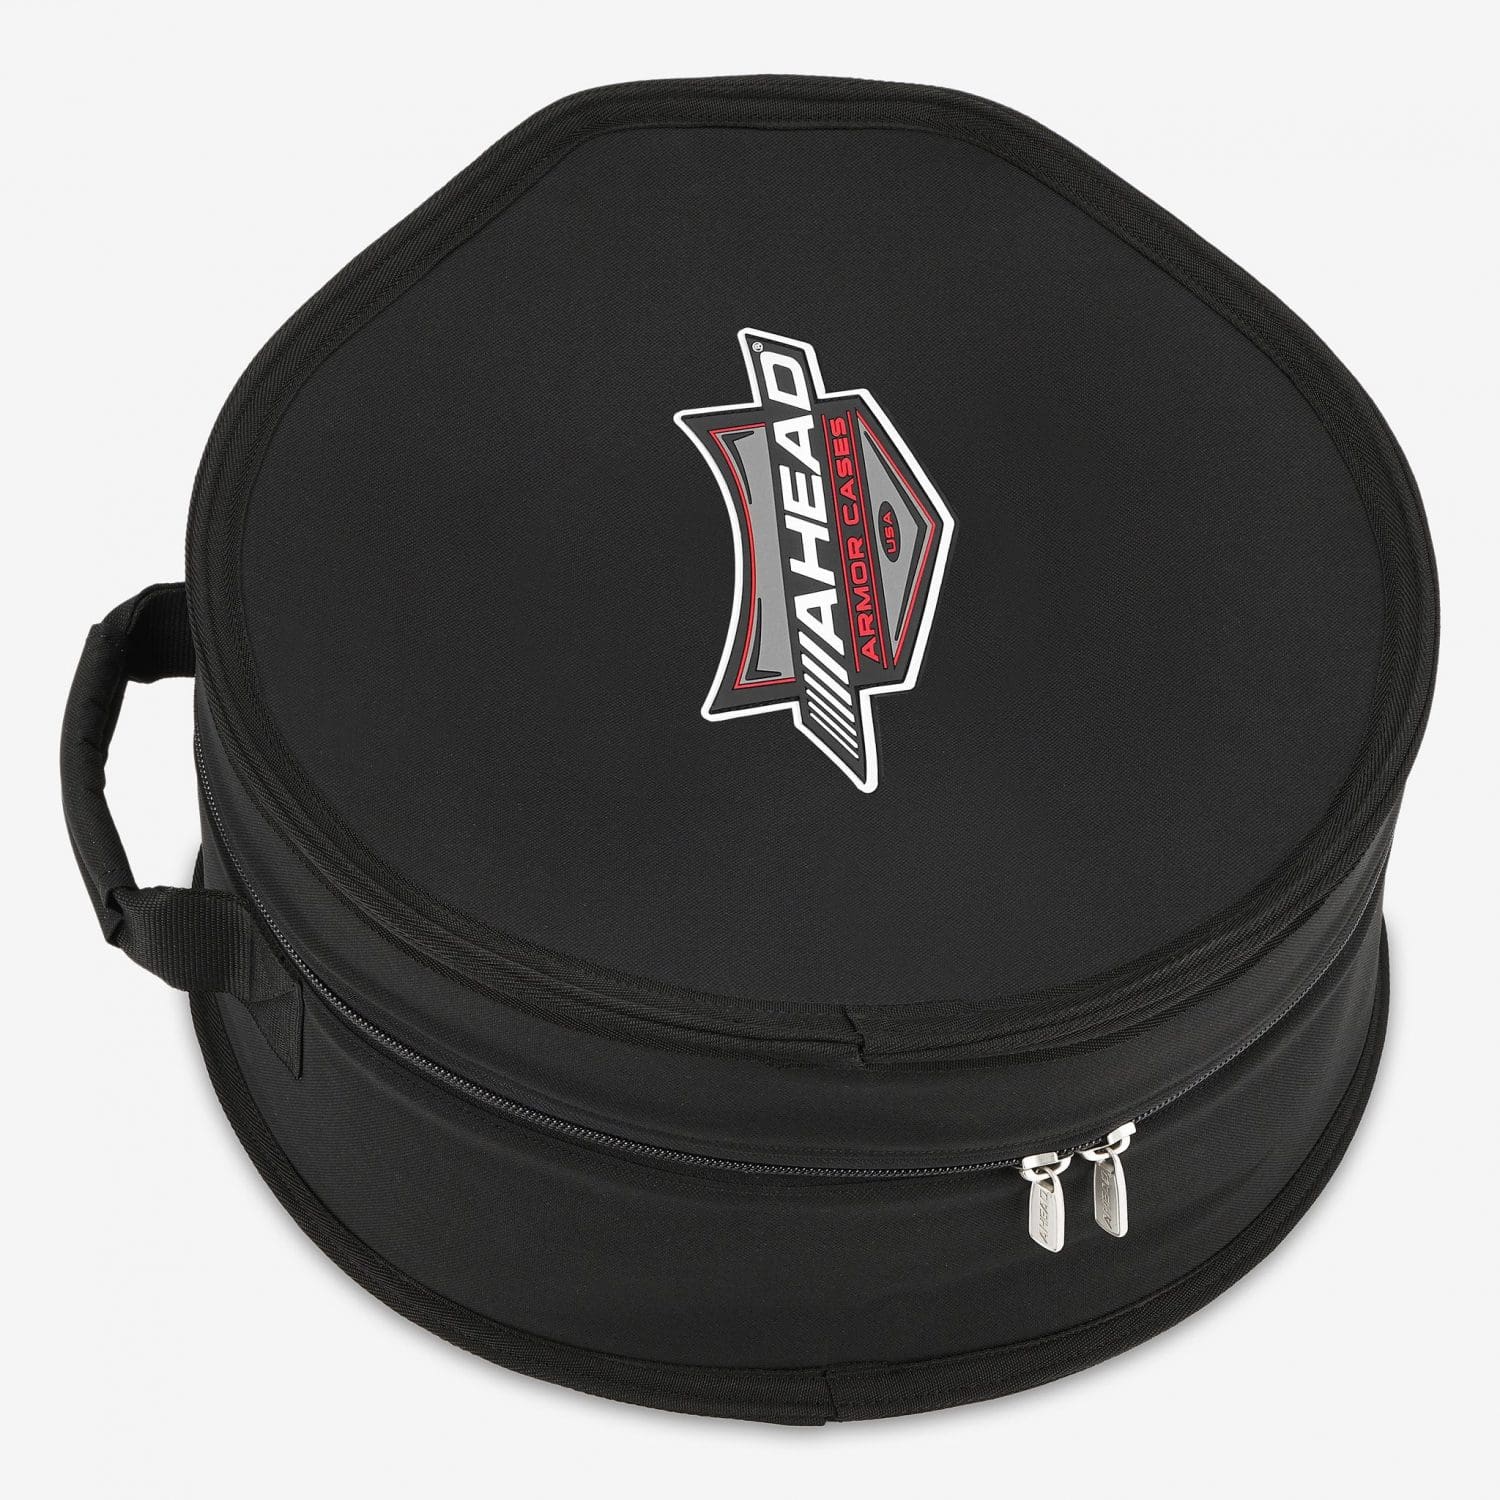 Dyna-Sonic Snare Drum Case